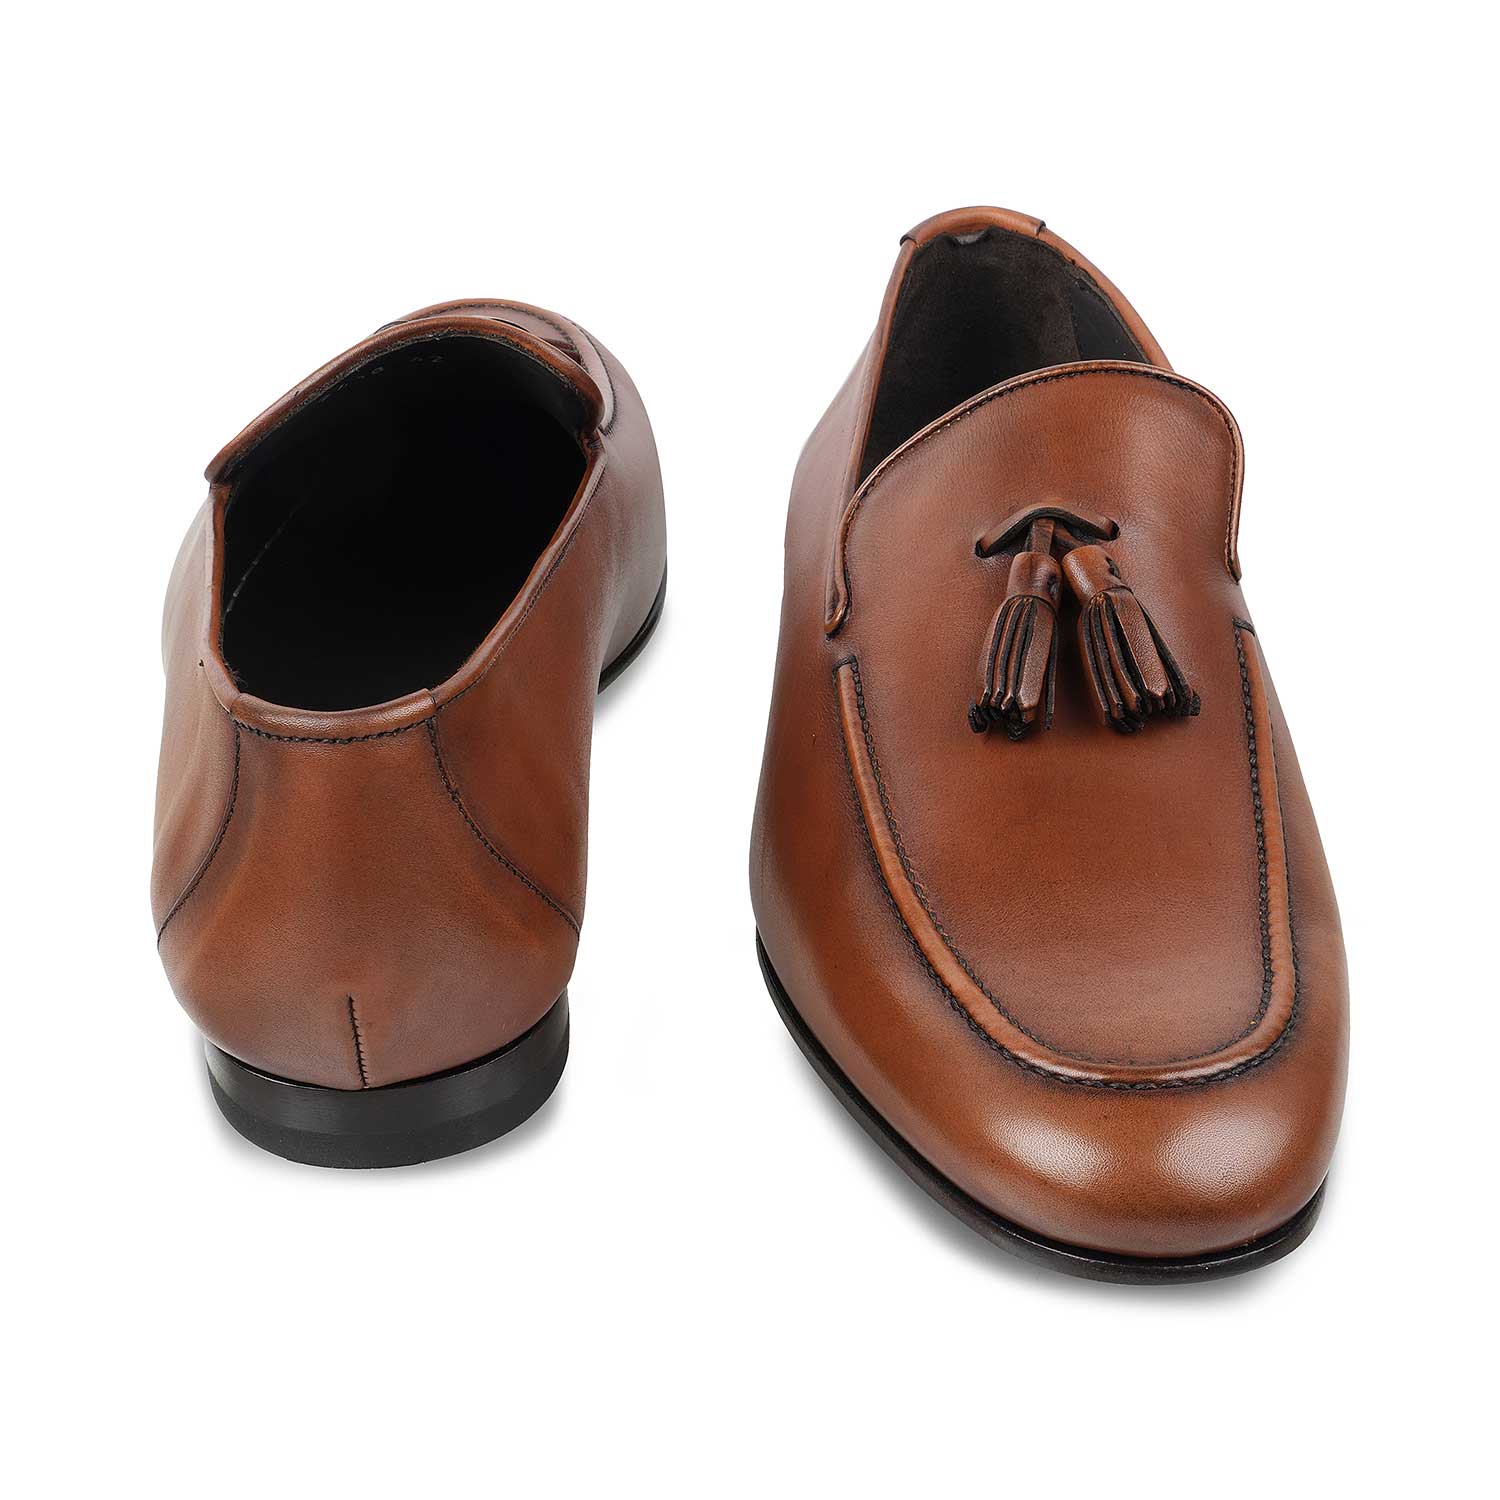 The Maiorico Brown Men's Handcrafted Leather Driving Loafers Tresmode